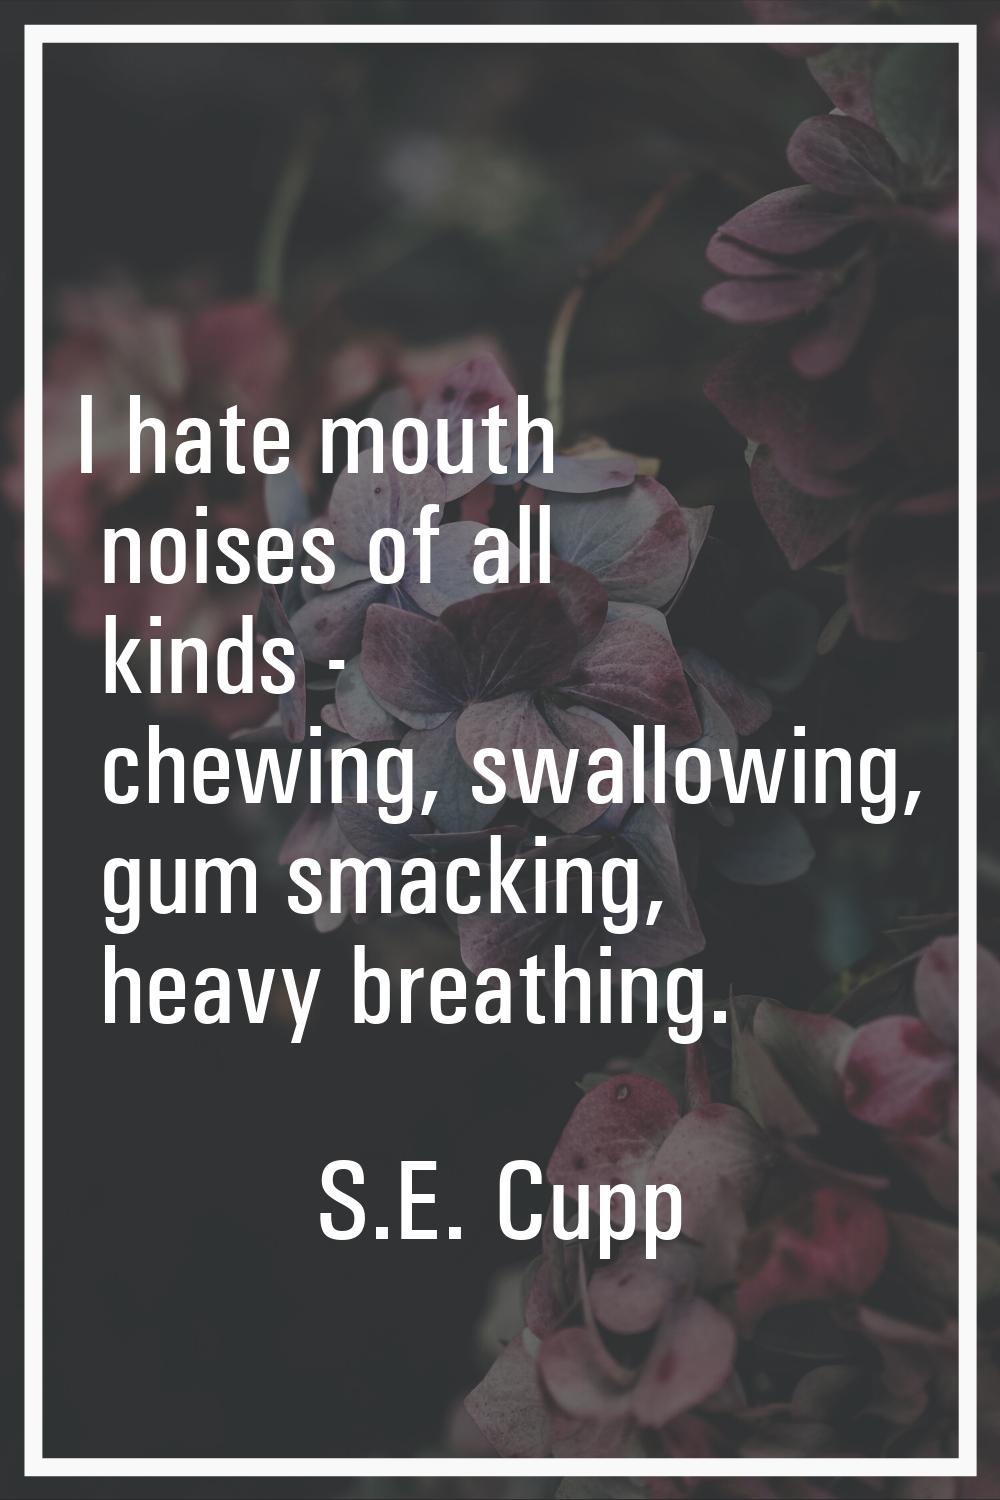 I hate mouth noises of all kinds - chewing, swallowing, gum smacking, heavy breathing.